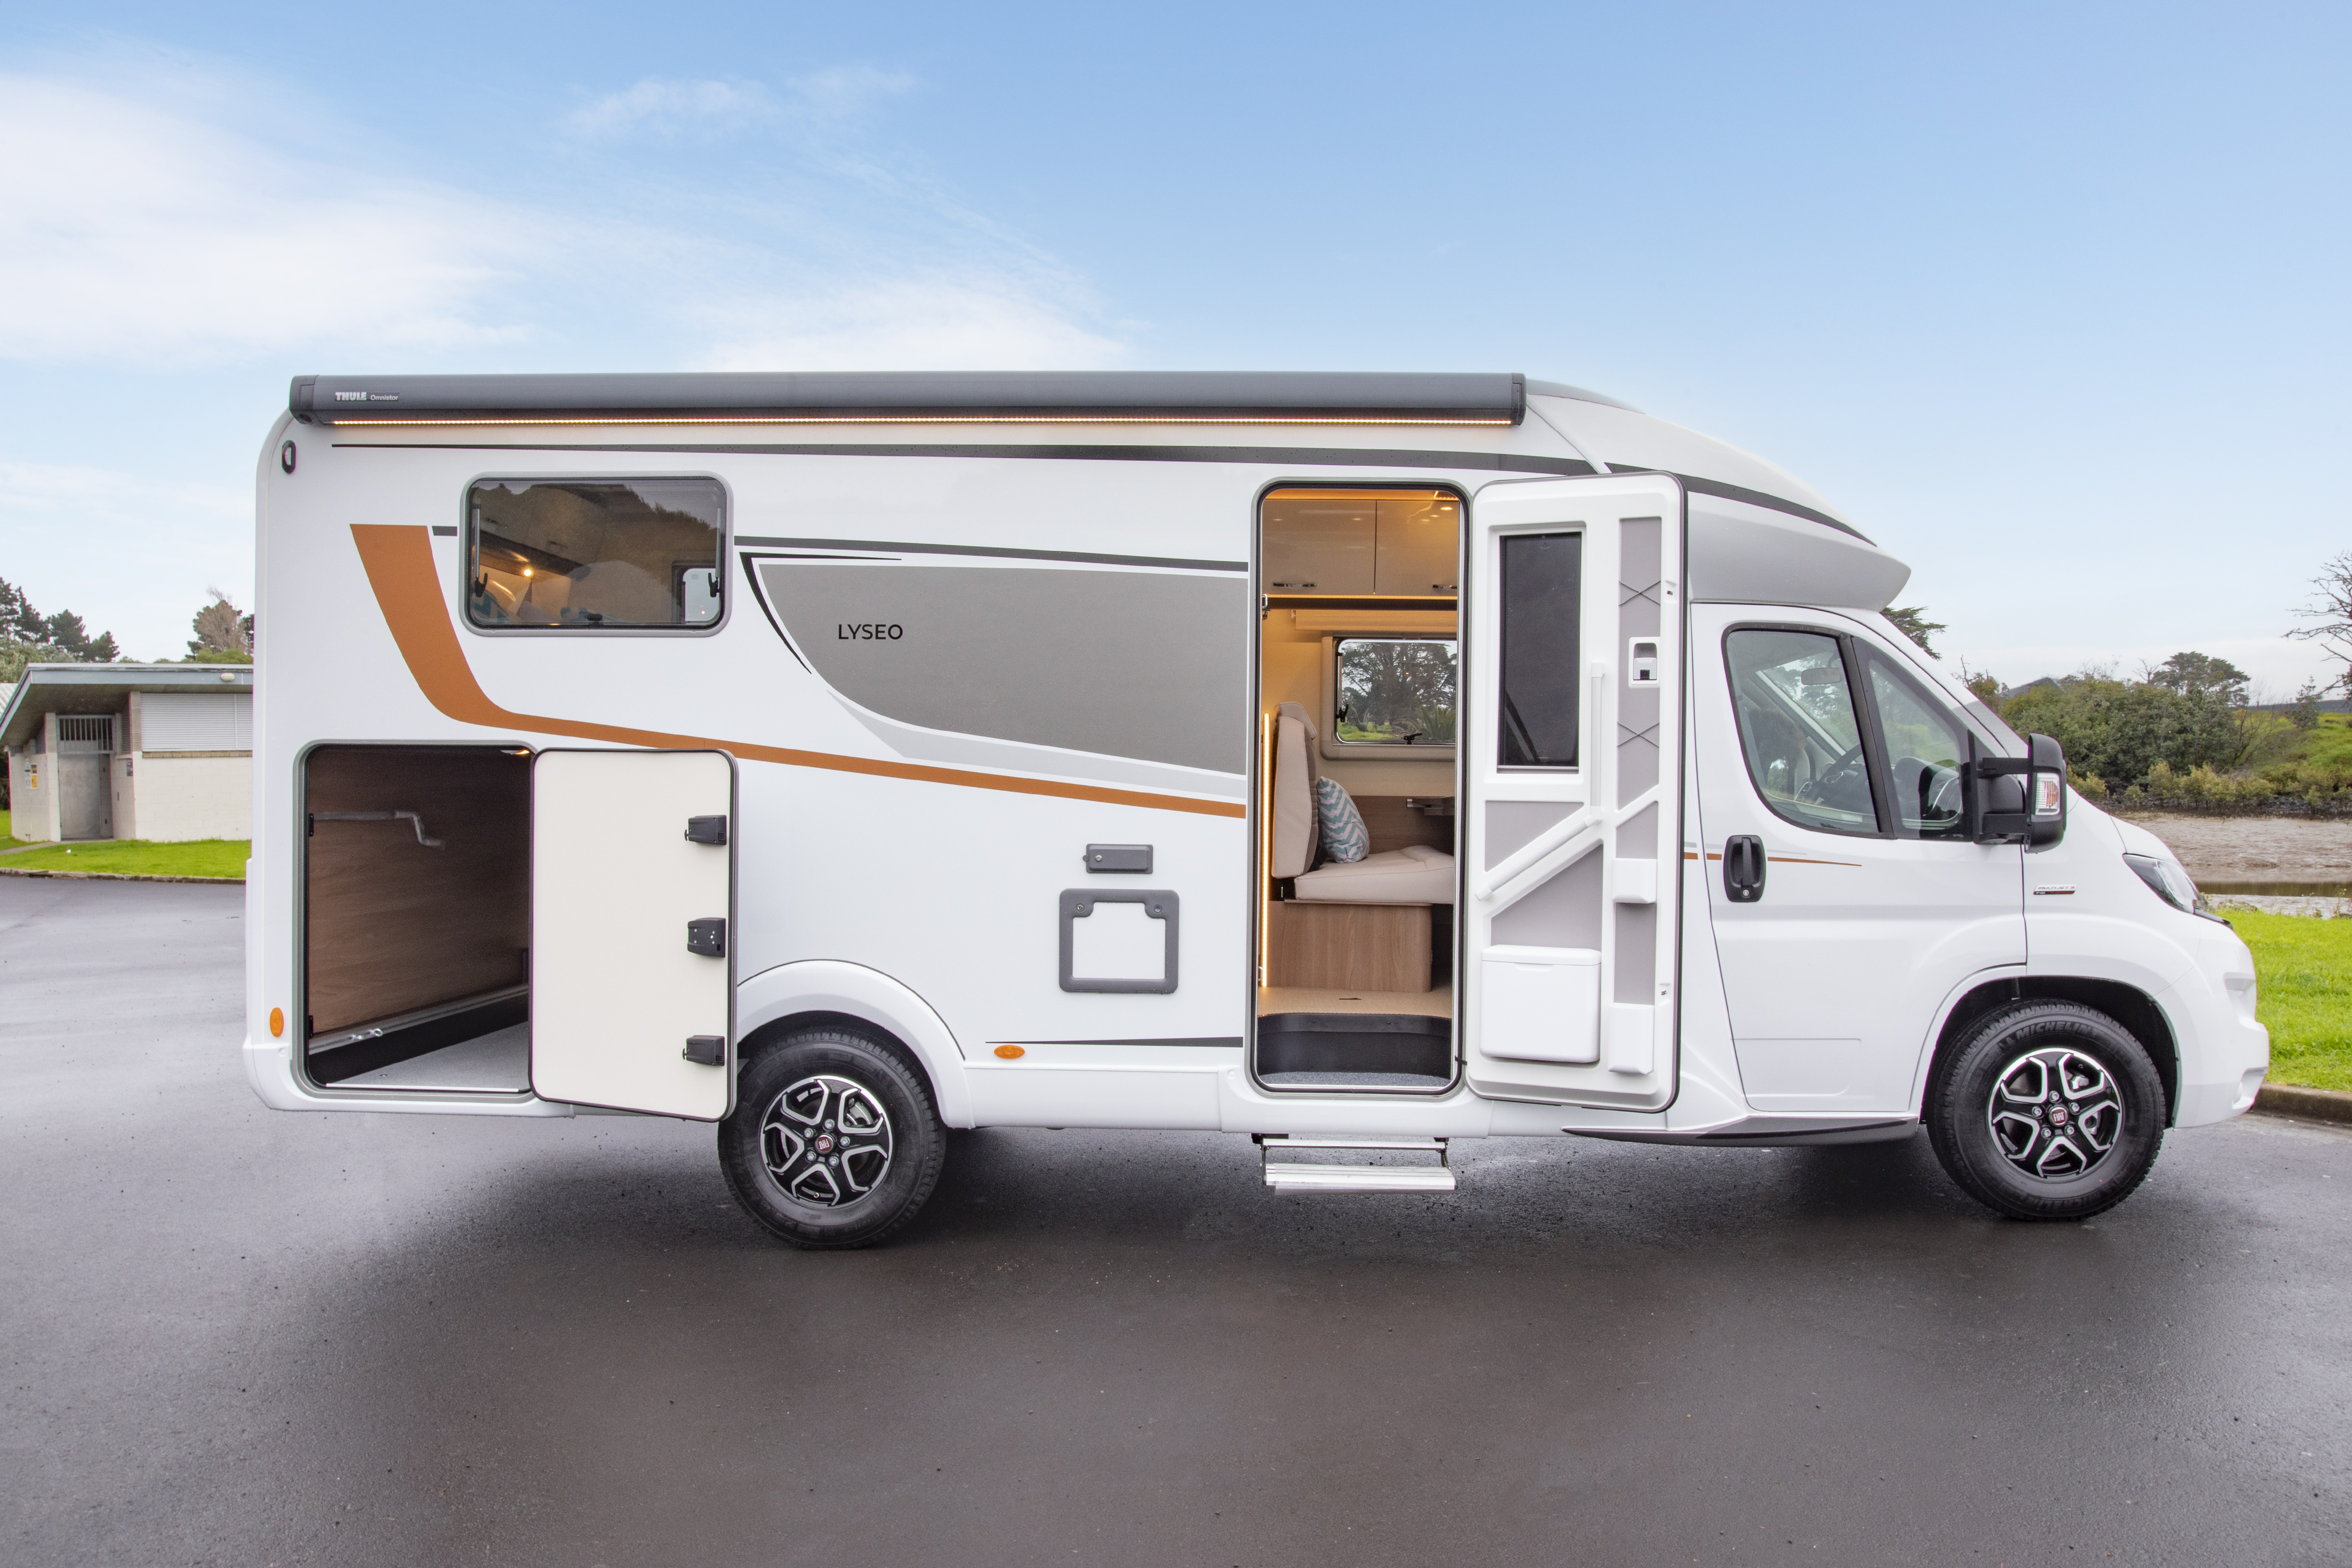 Wilderness 2022 Lyseo TD690G motorhome exterior side and storage